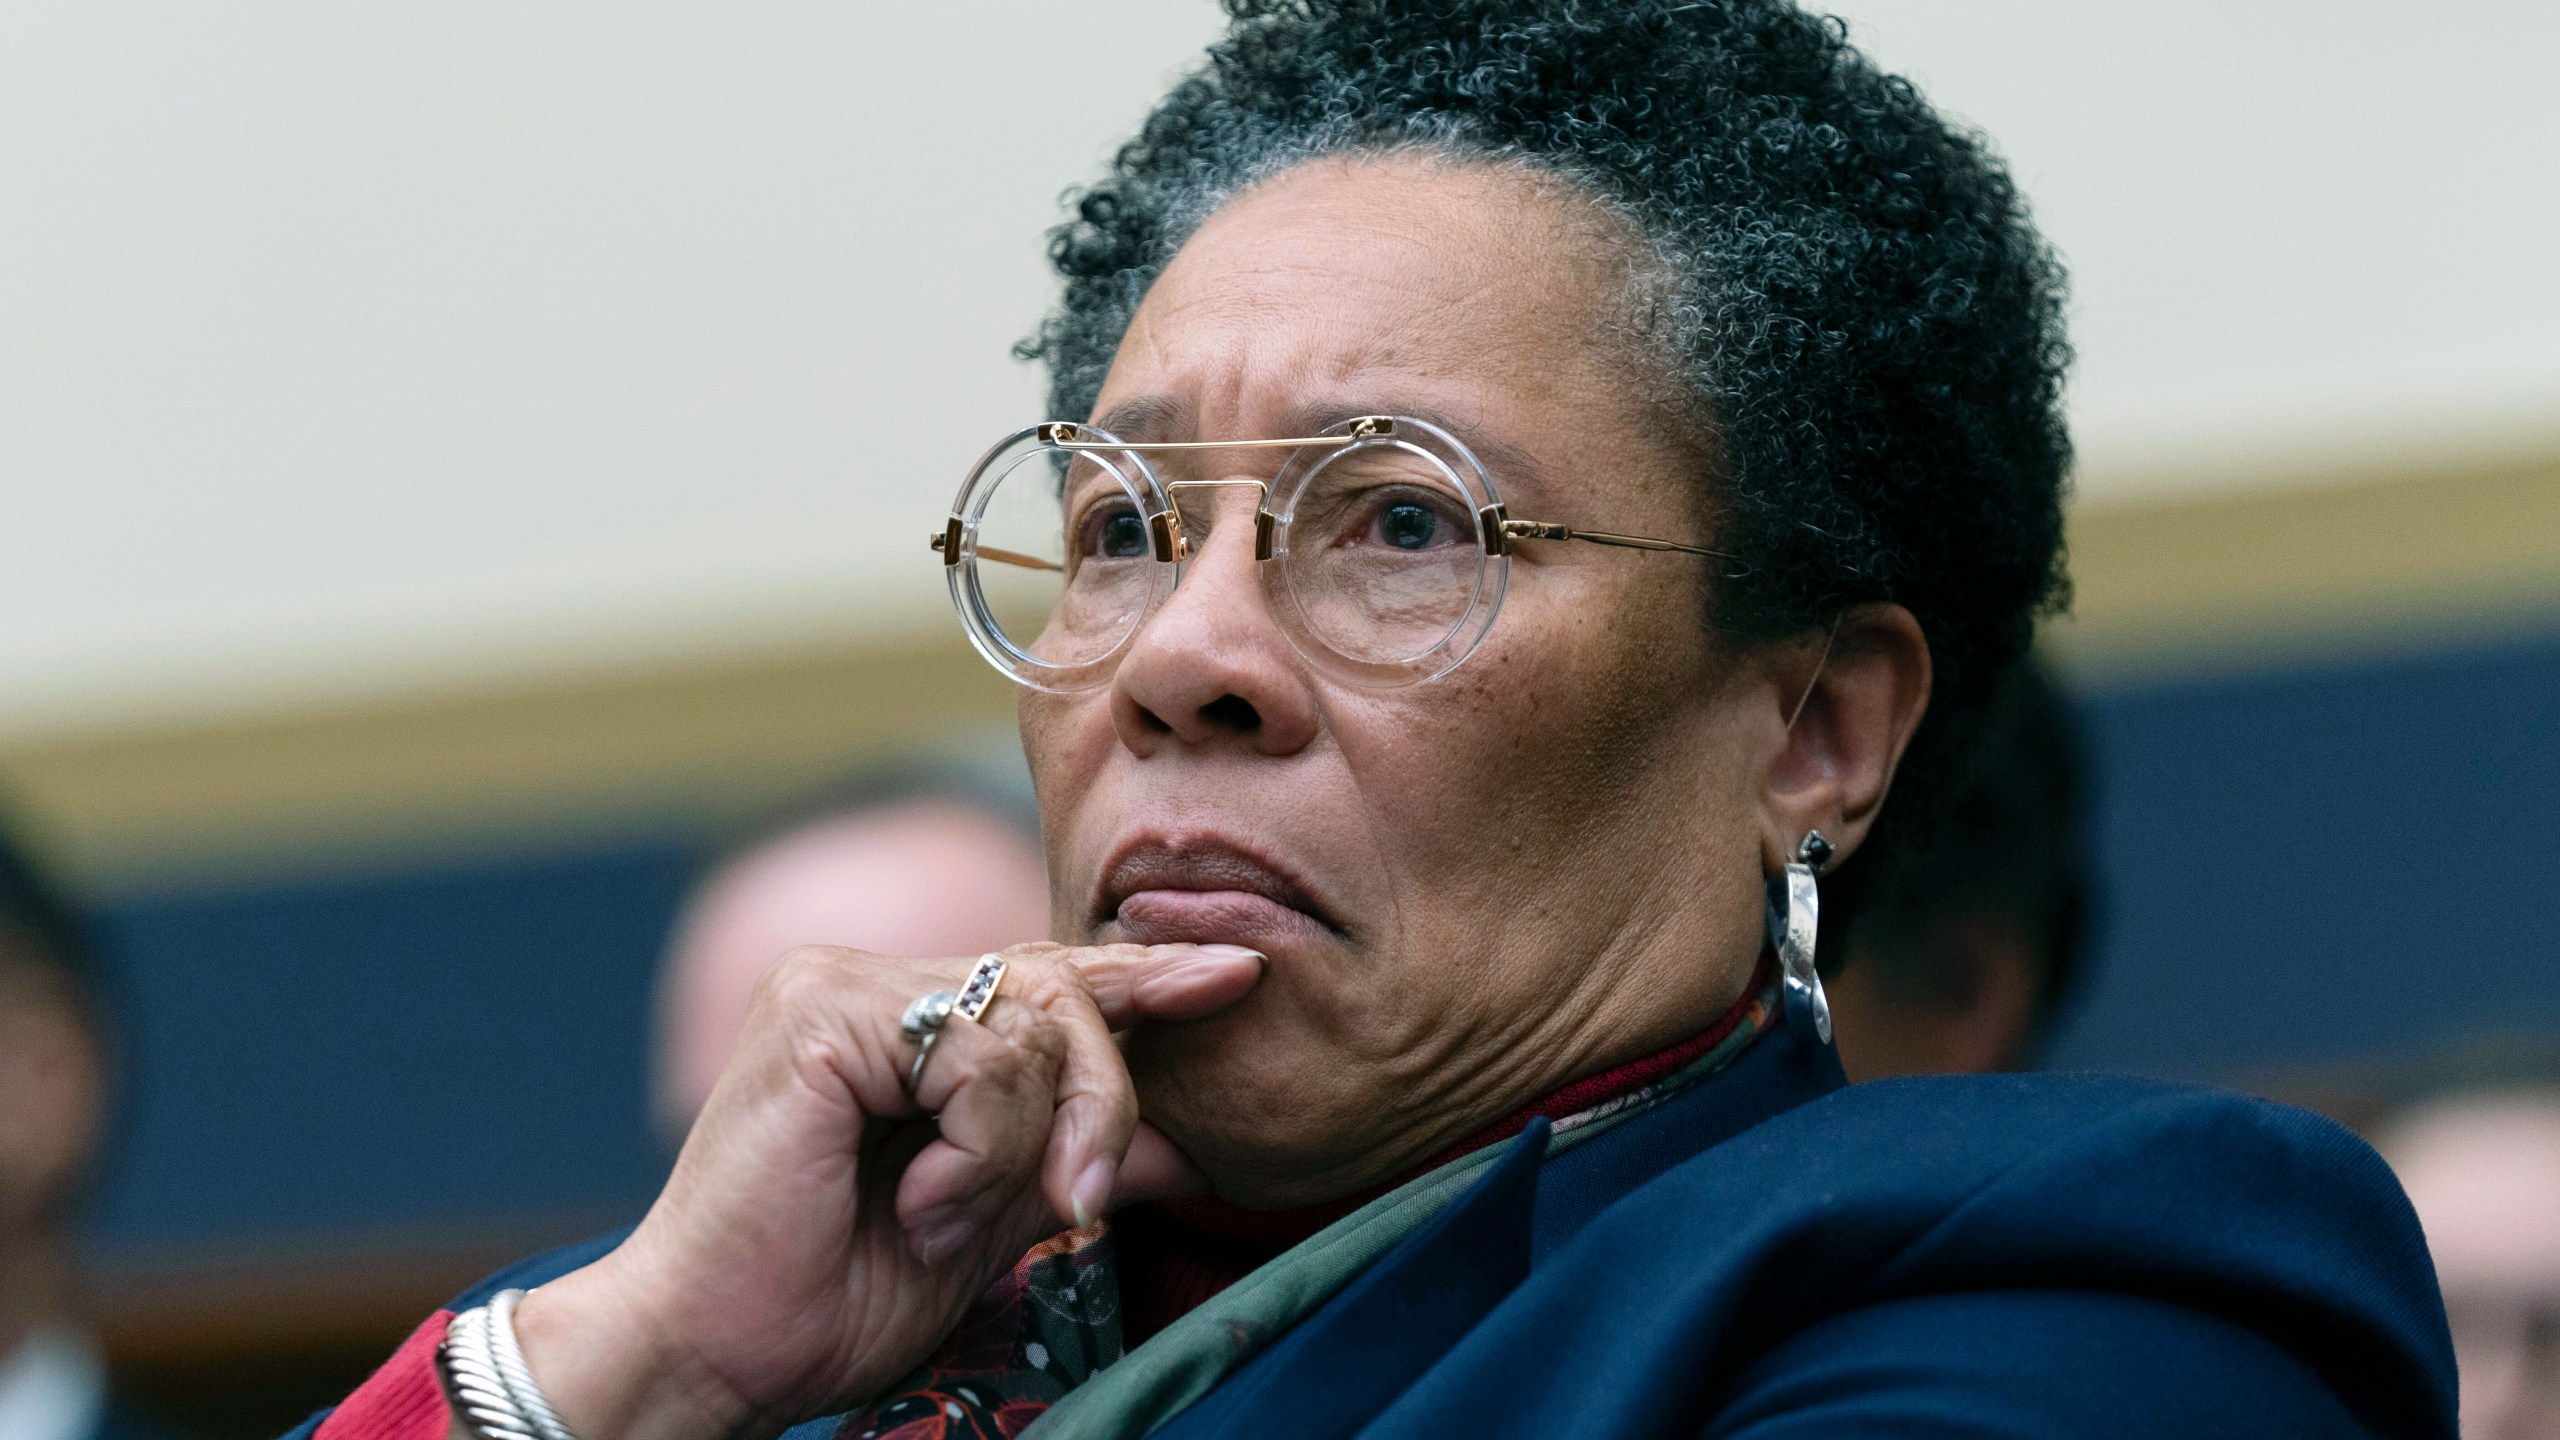 FILE - U.S. Secretary of Department of Housing and Urban Development Marcia Fudge testifies before the House Committee on Financial Services hearing on Capitol Hill, Jan. 11, 2024, in Washington. Fudge announced Monday, March 11, 2024, that she would resign her post, effective March 22, saying she was leaving “with mixed emotions.” (AP Photo/Jose Luis Magana, File)